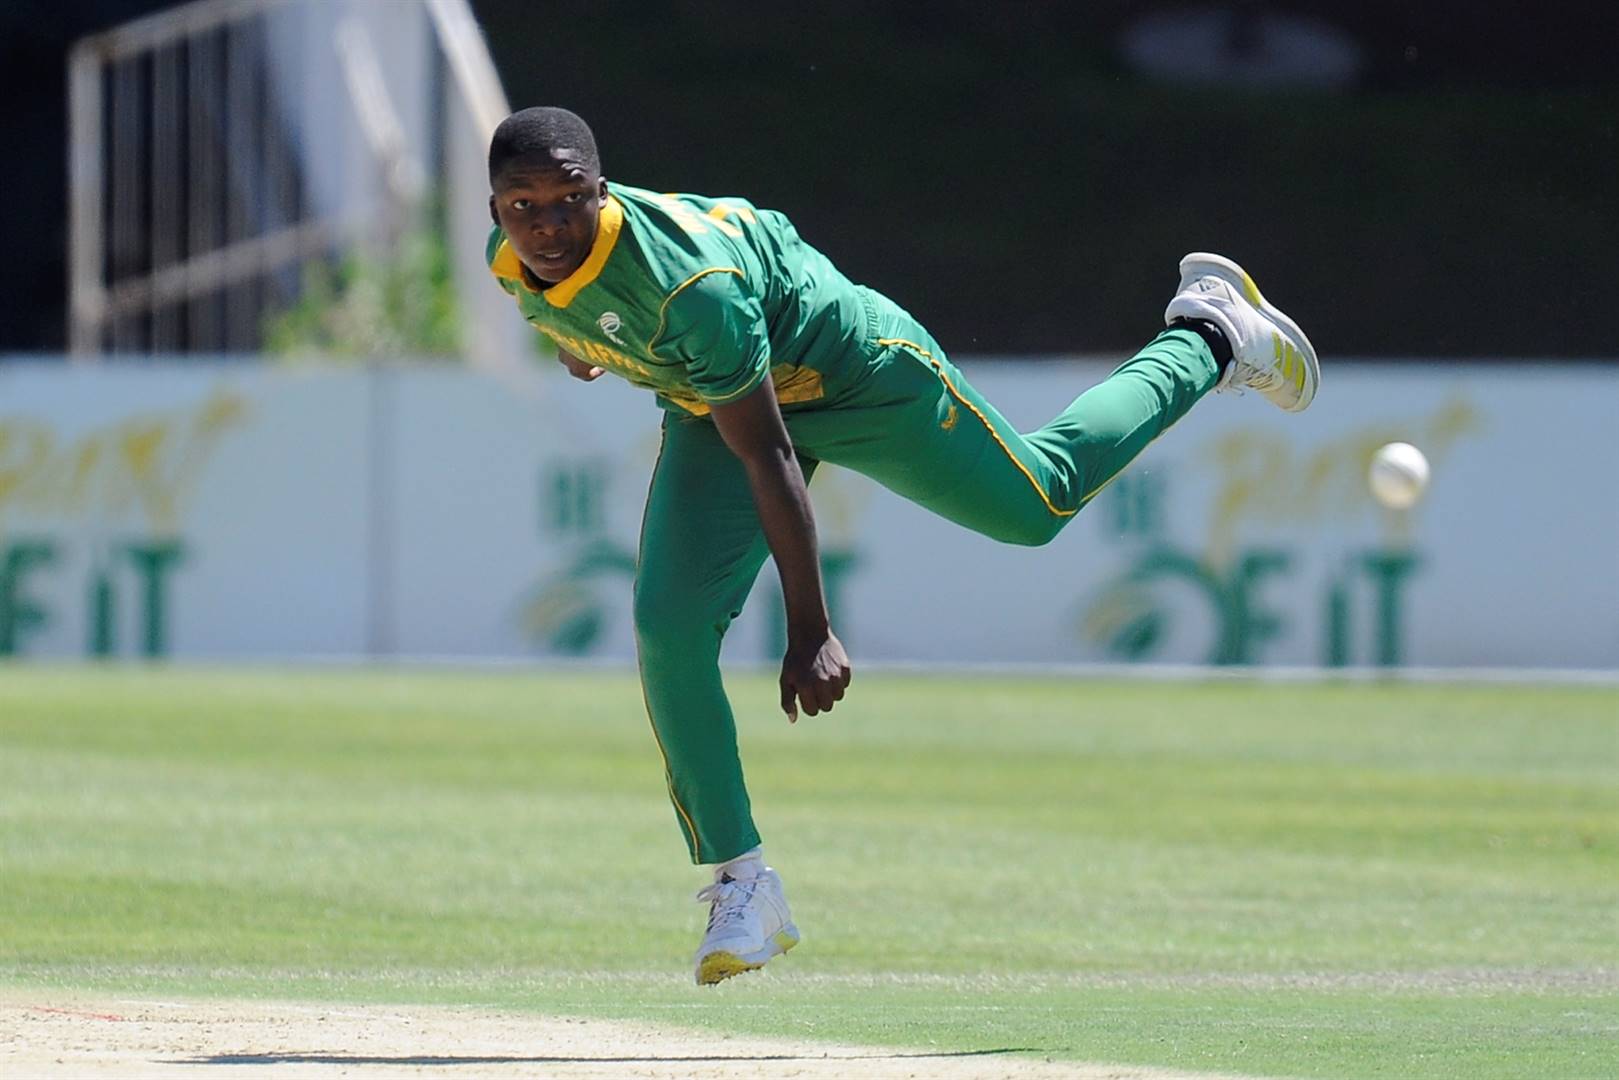 Kwena Maphaka, who can ramp up speeds of more than 140km, was signed on Wednesday 